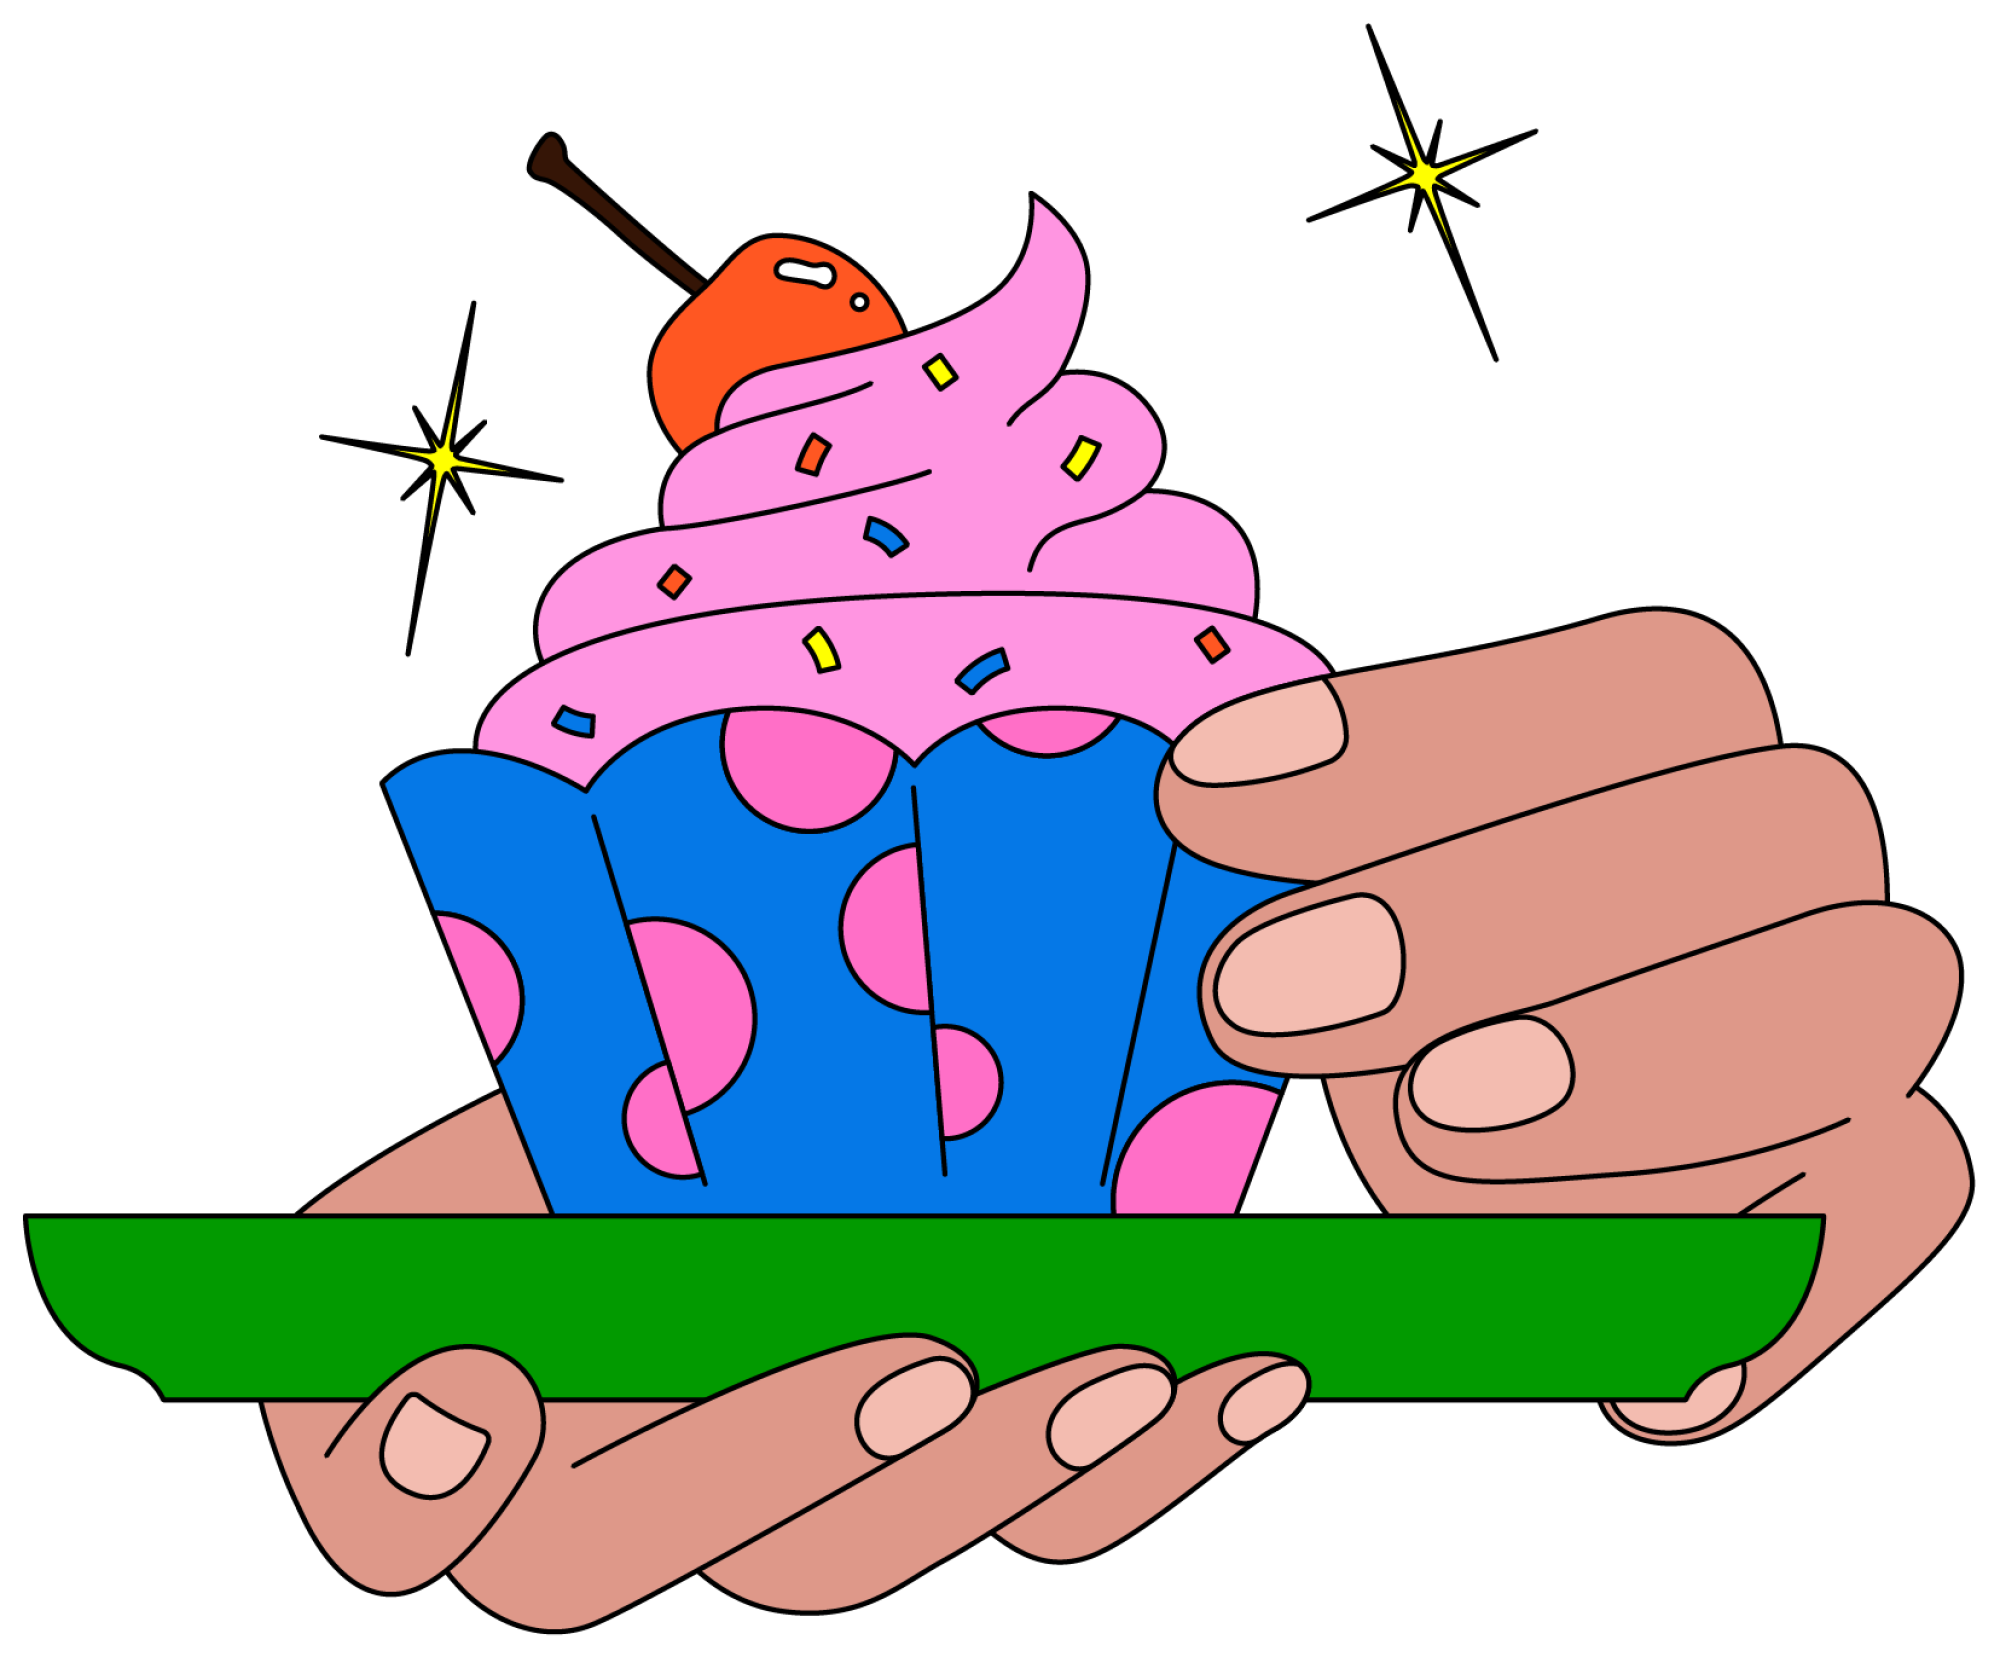 Illustration of a cupcake on a plate